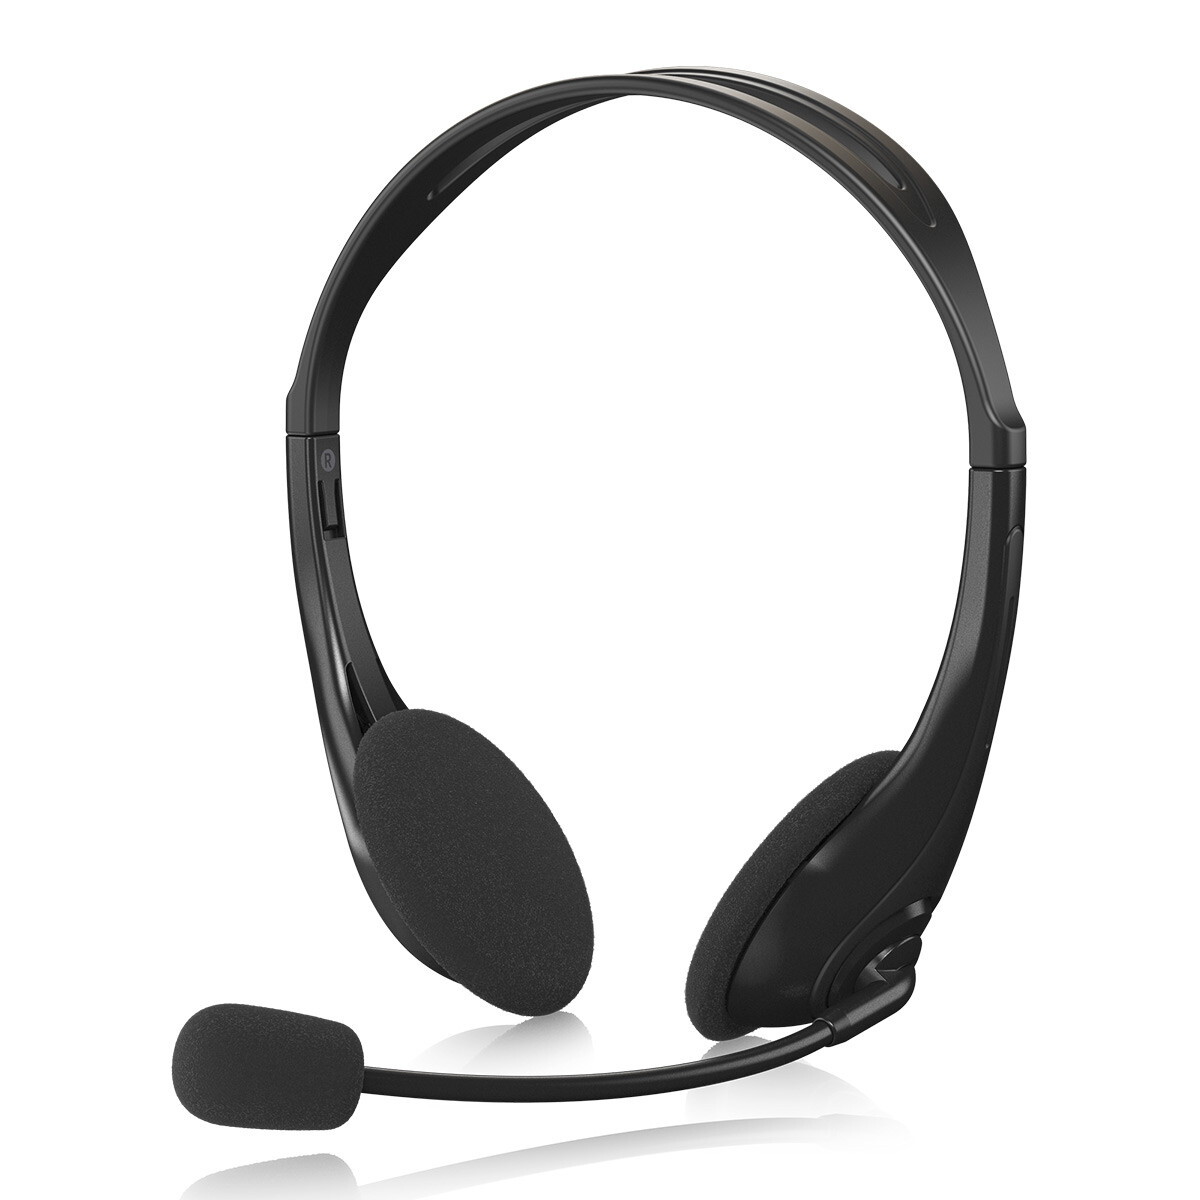 Auriculares Behringer Hs20 Con mic negros 